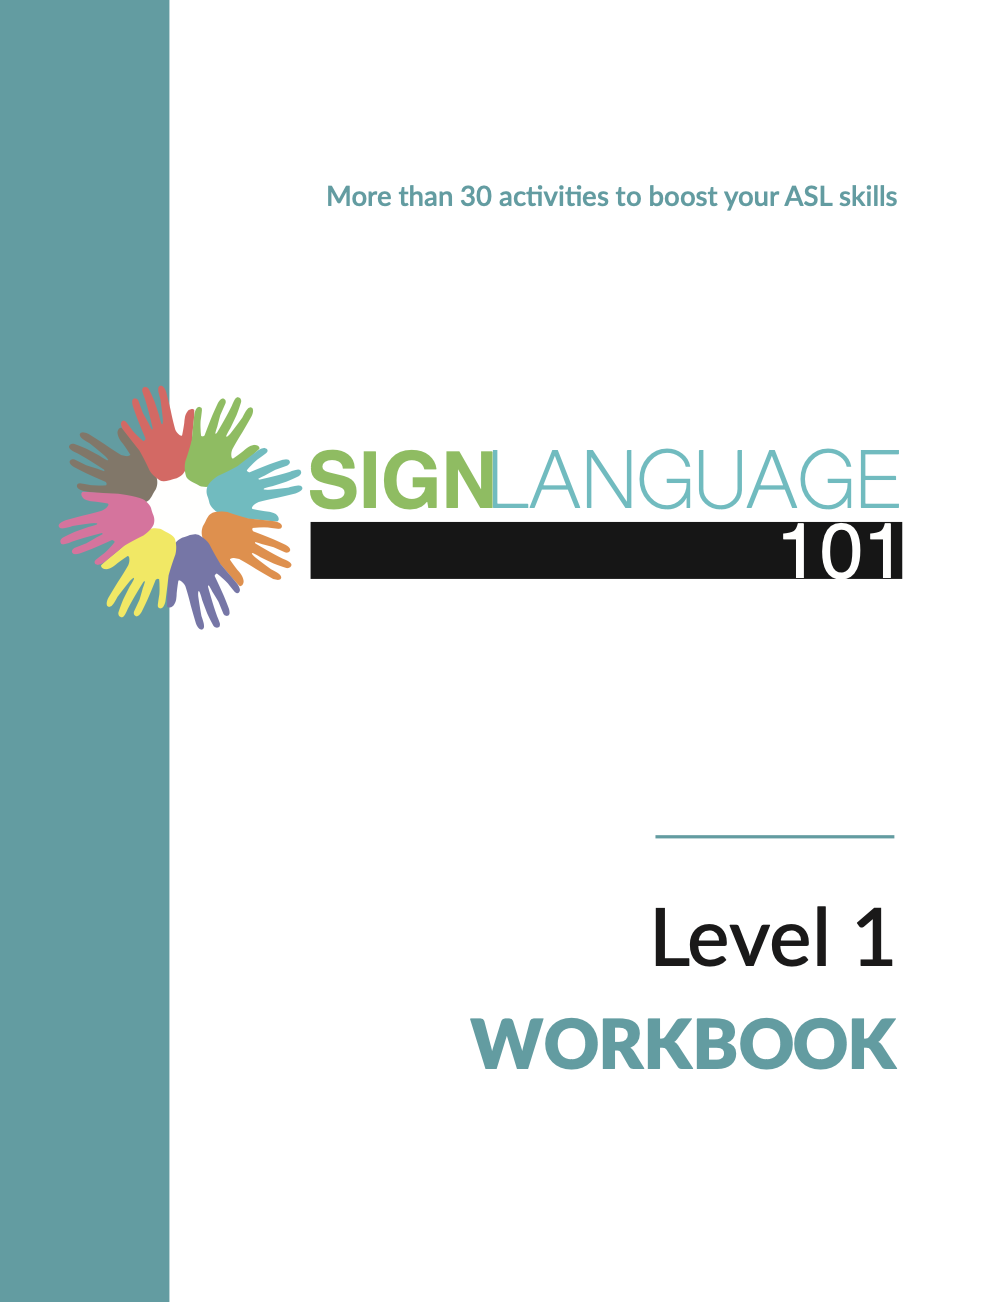 Sign Language 101 ASL Level 1 Course workbook cover